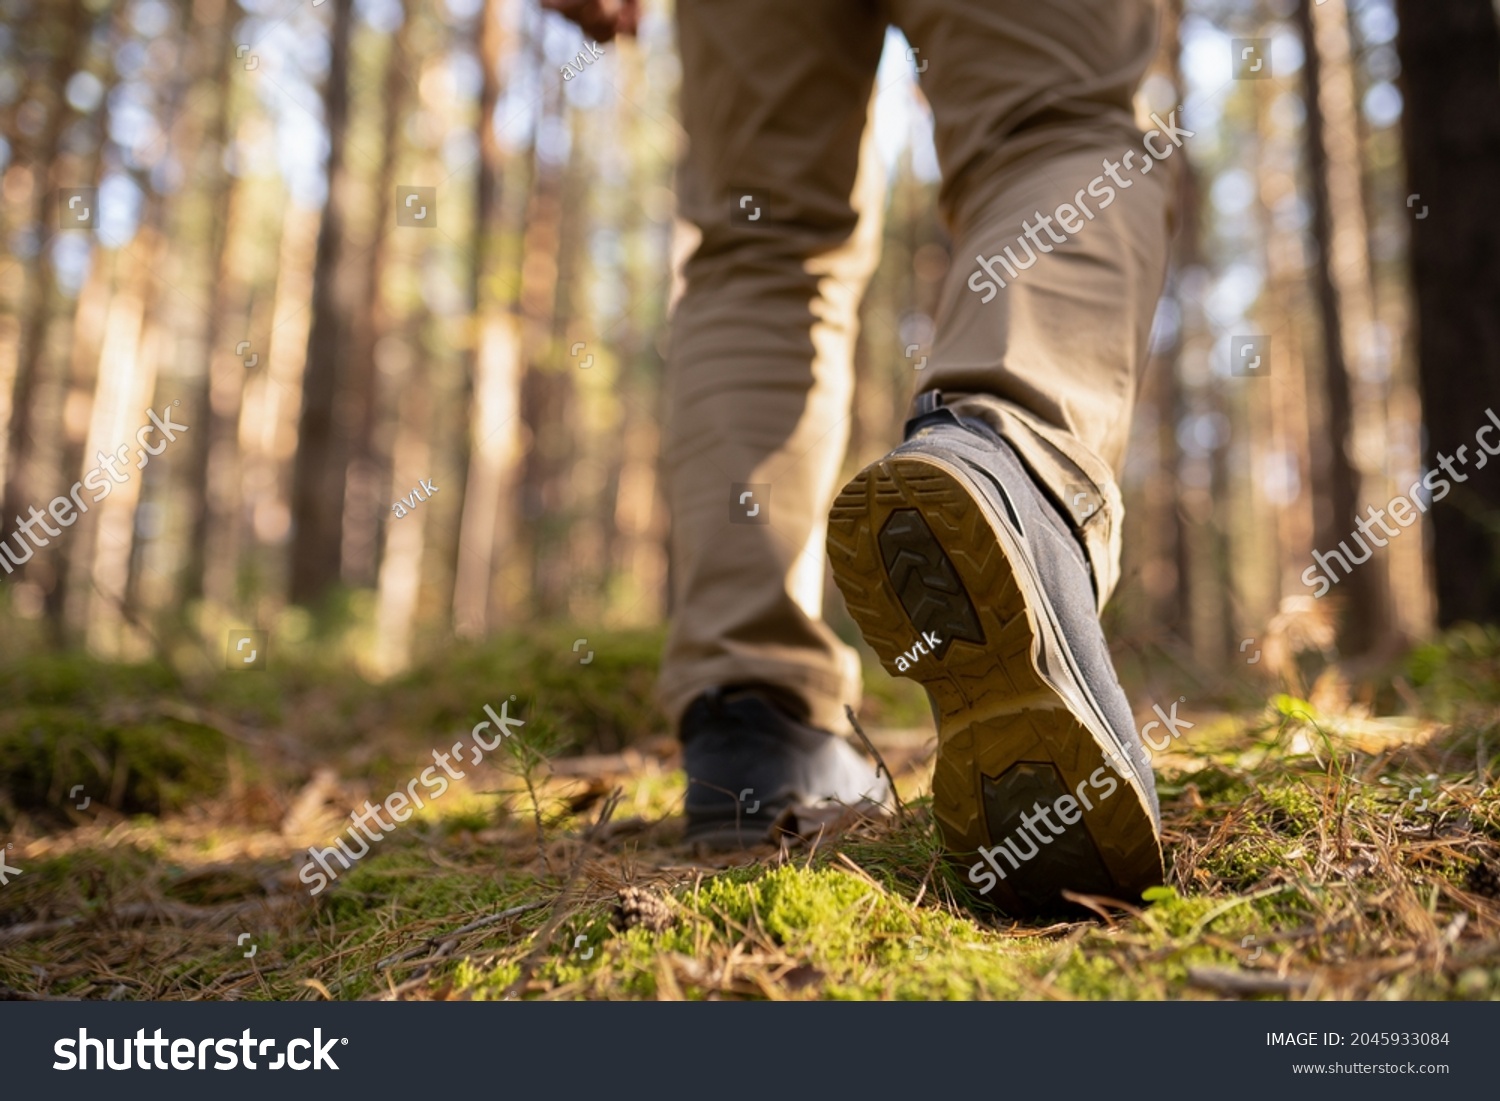 adult hiker person walking in the woods. Speed-hiking shoes closeup. #2045933084